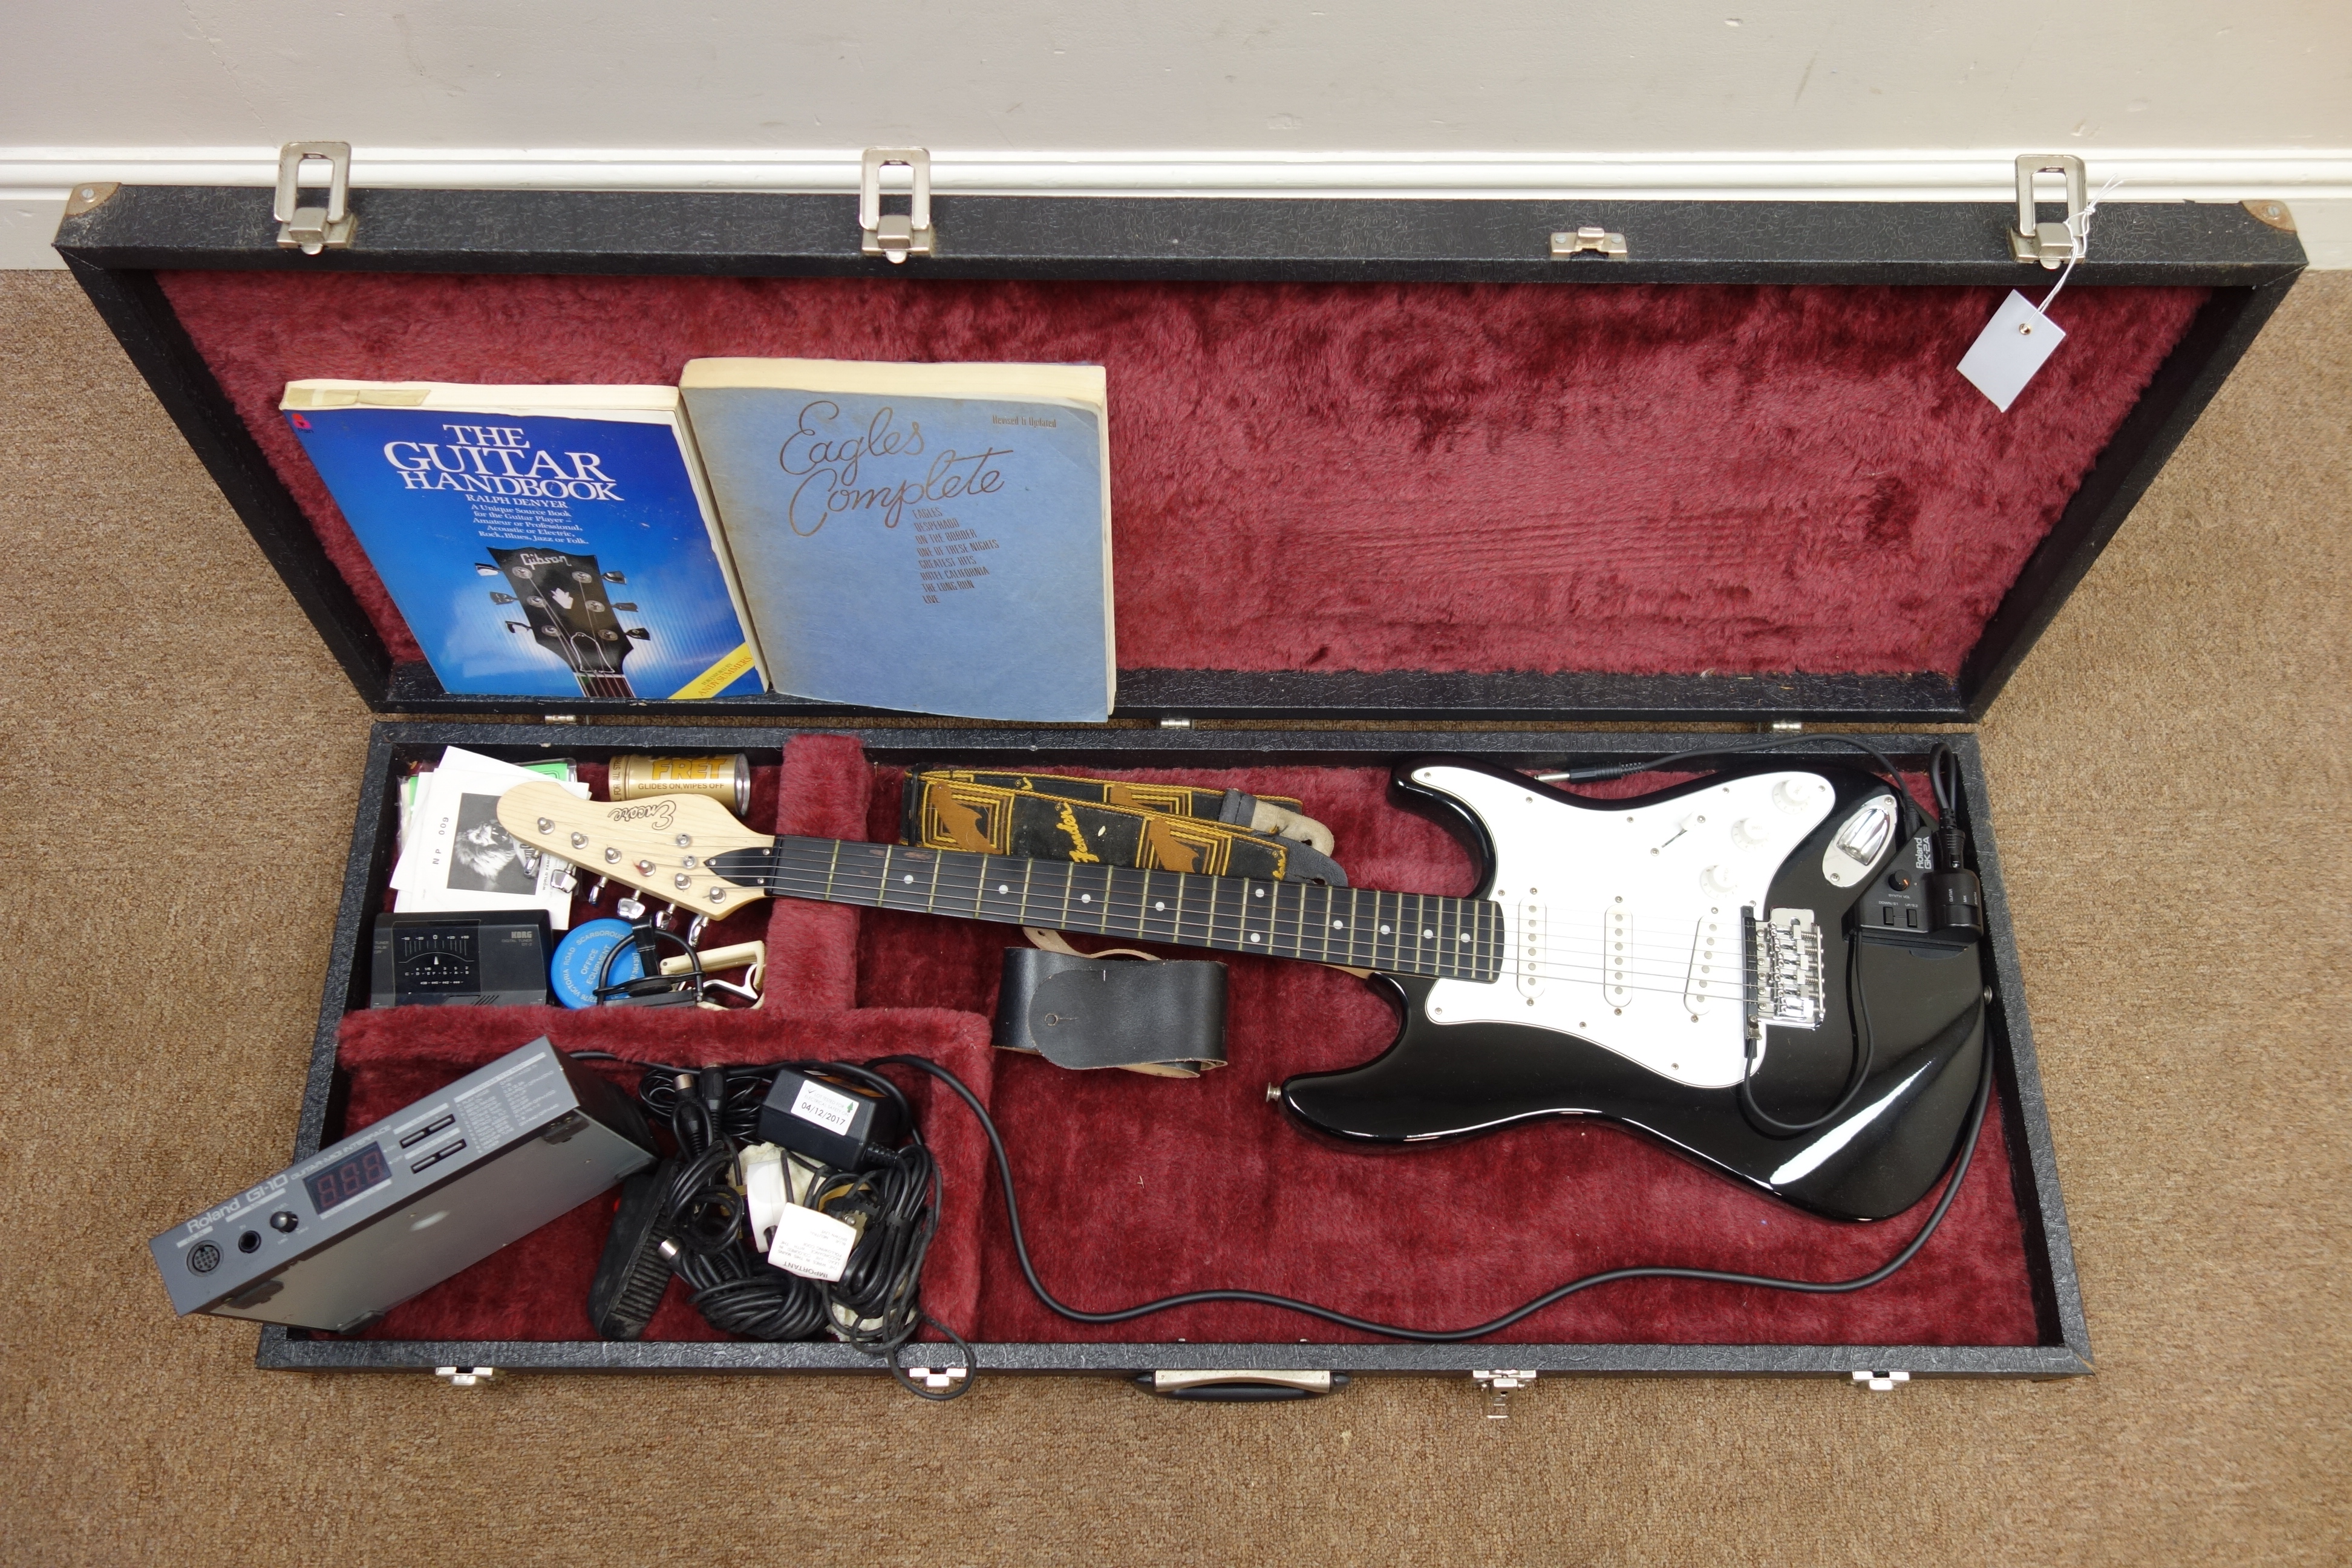 Encore electric guitar with Roland GK 2a pickup and Roland GI-10 guitar-midi interface in carry